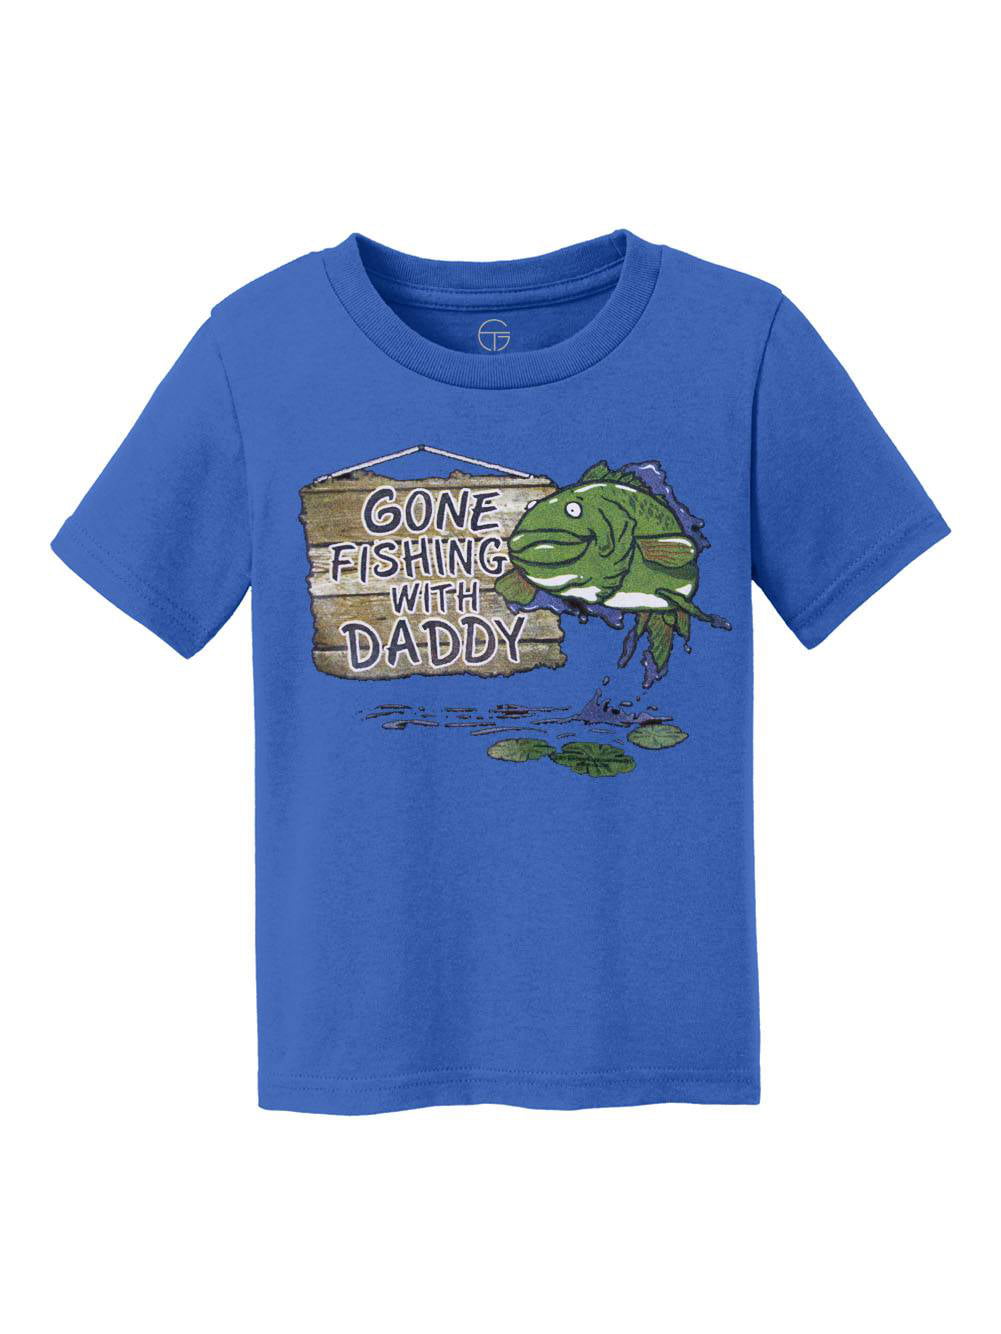 Gone Fishing With Daddy Kids Cotton T-Shirt - Aqua Blue - Small